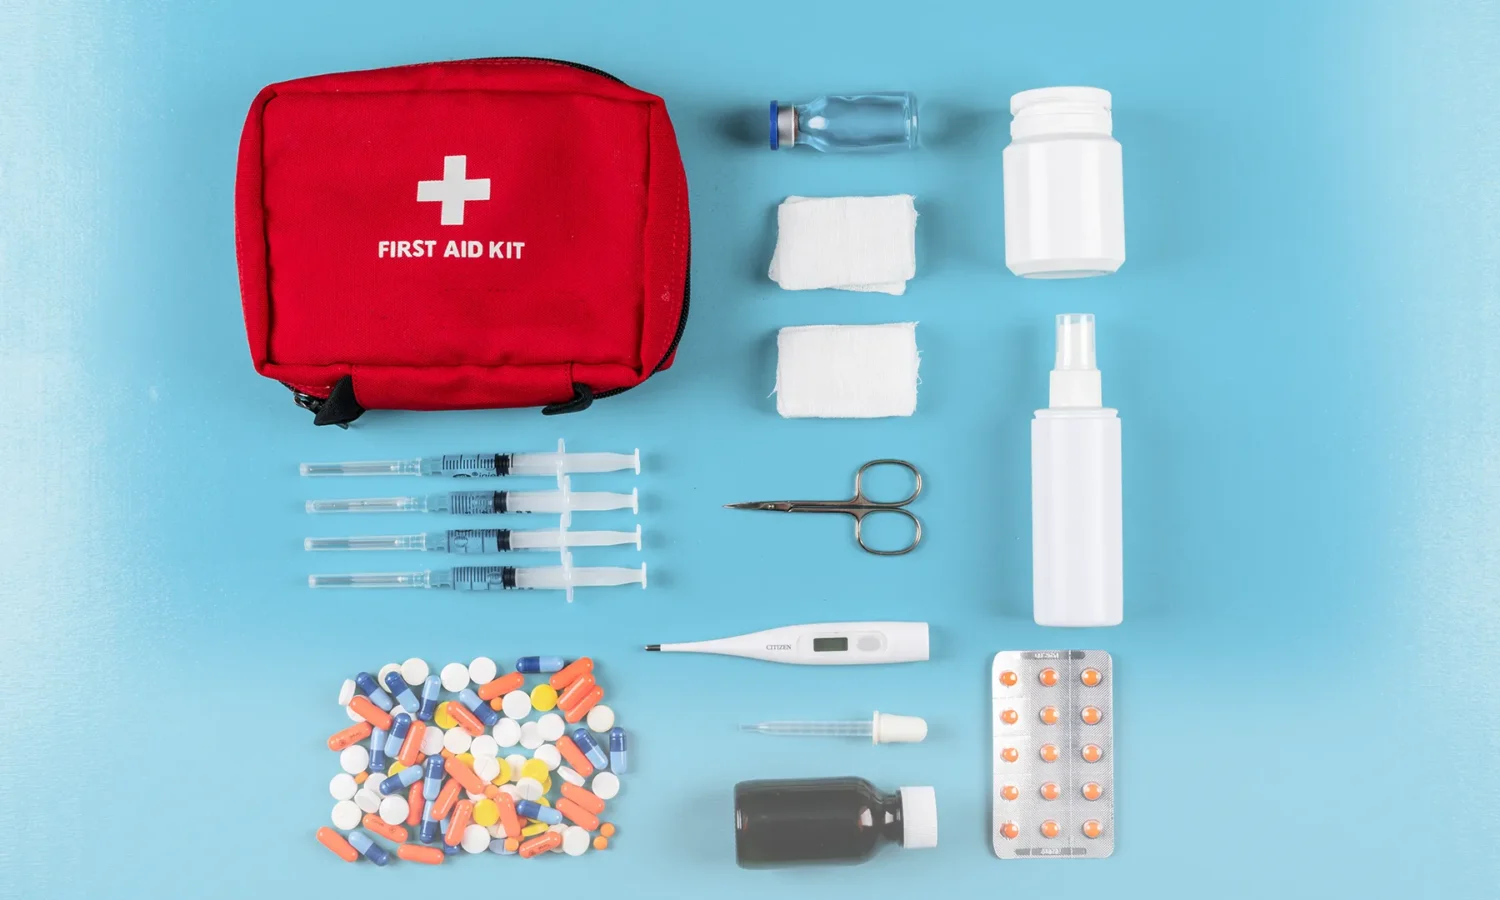 first aid kit at home - what should it contain